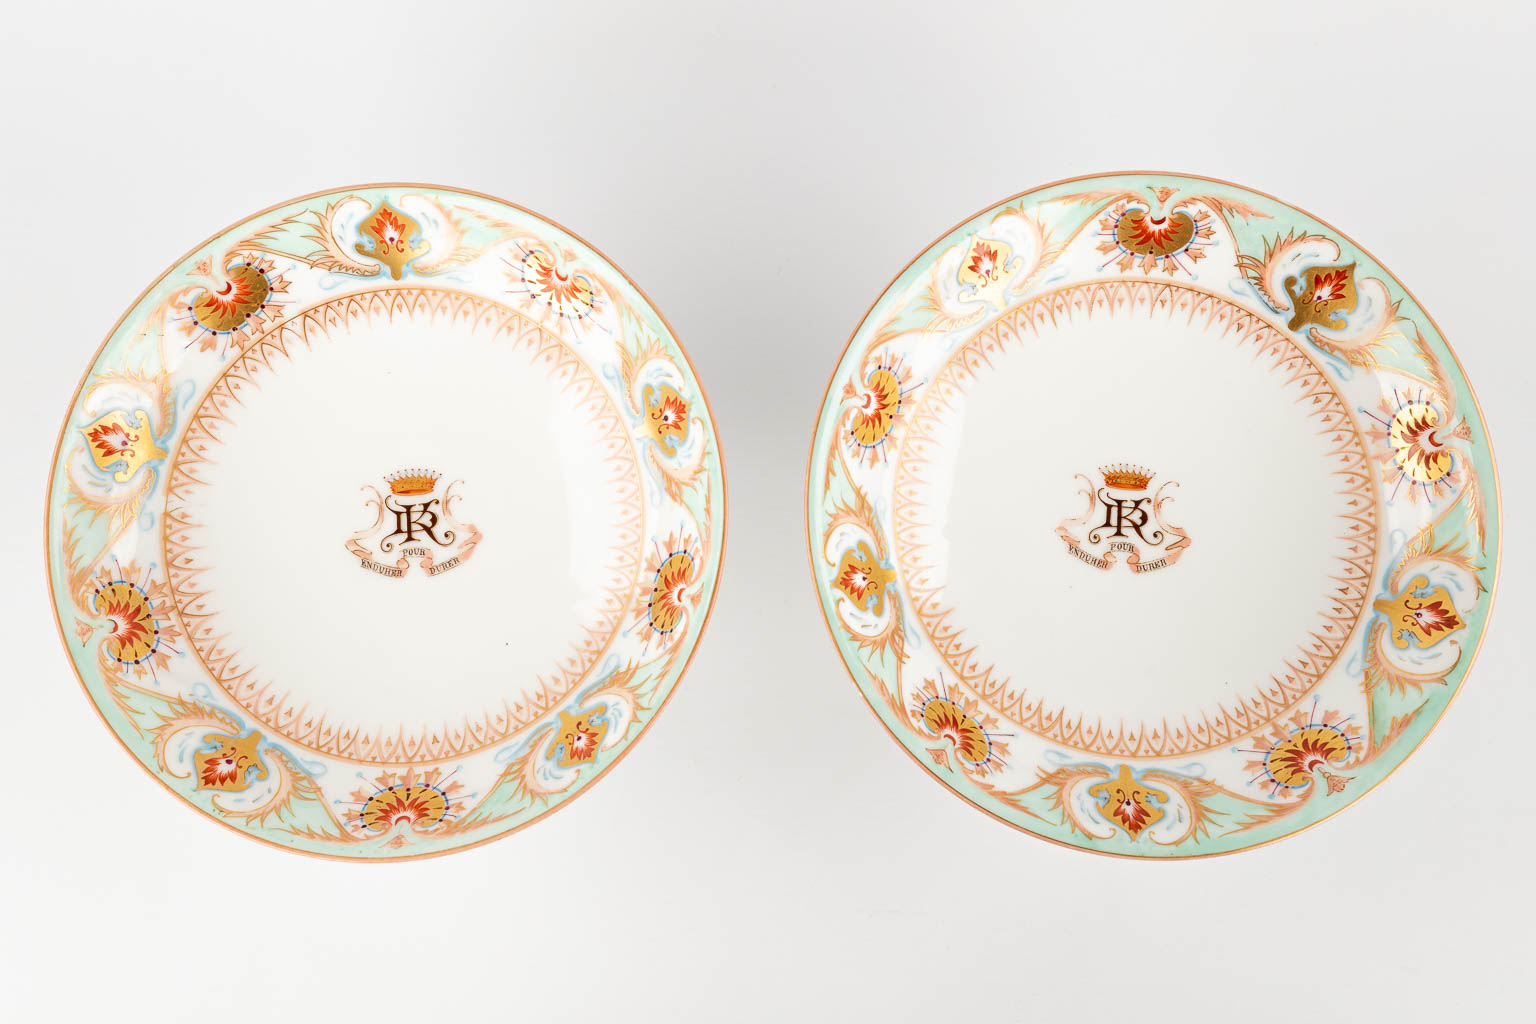 A set of 2 tazza and 6 plates, Count 